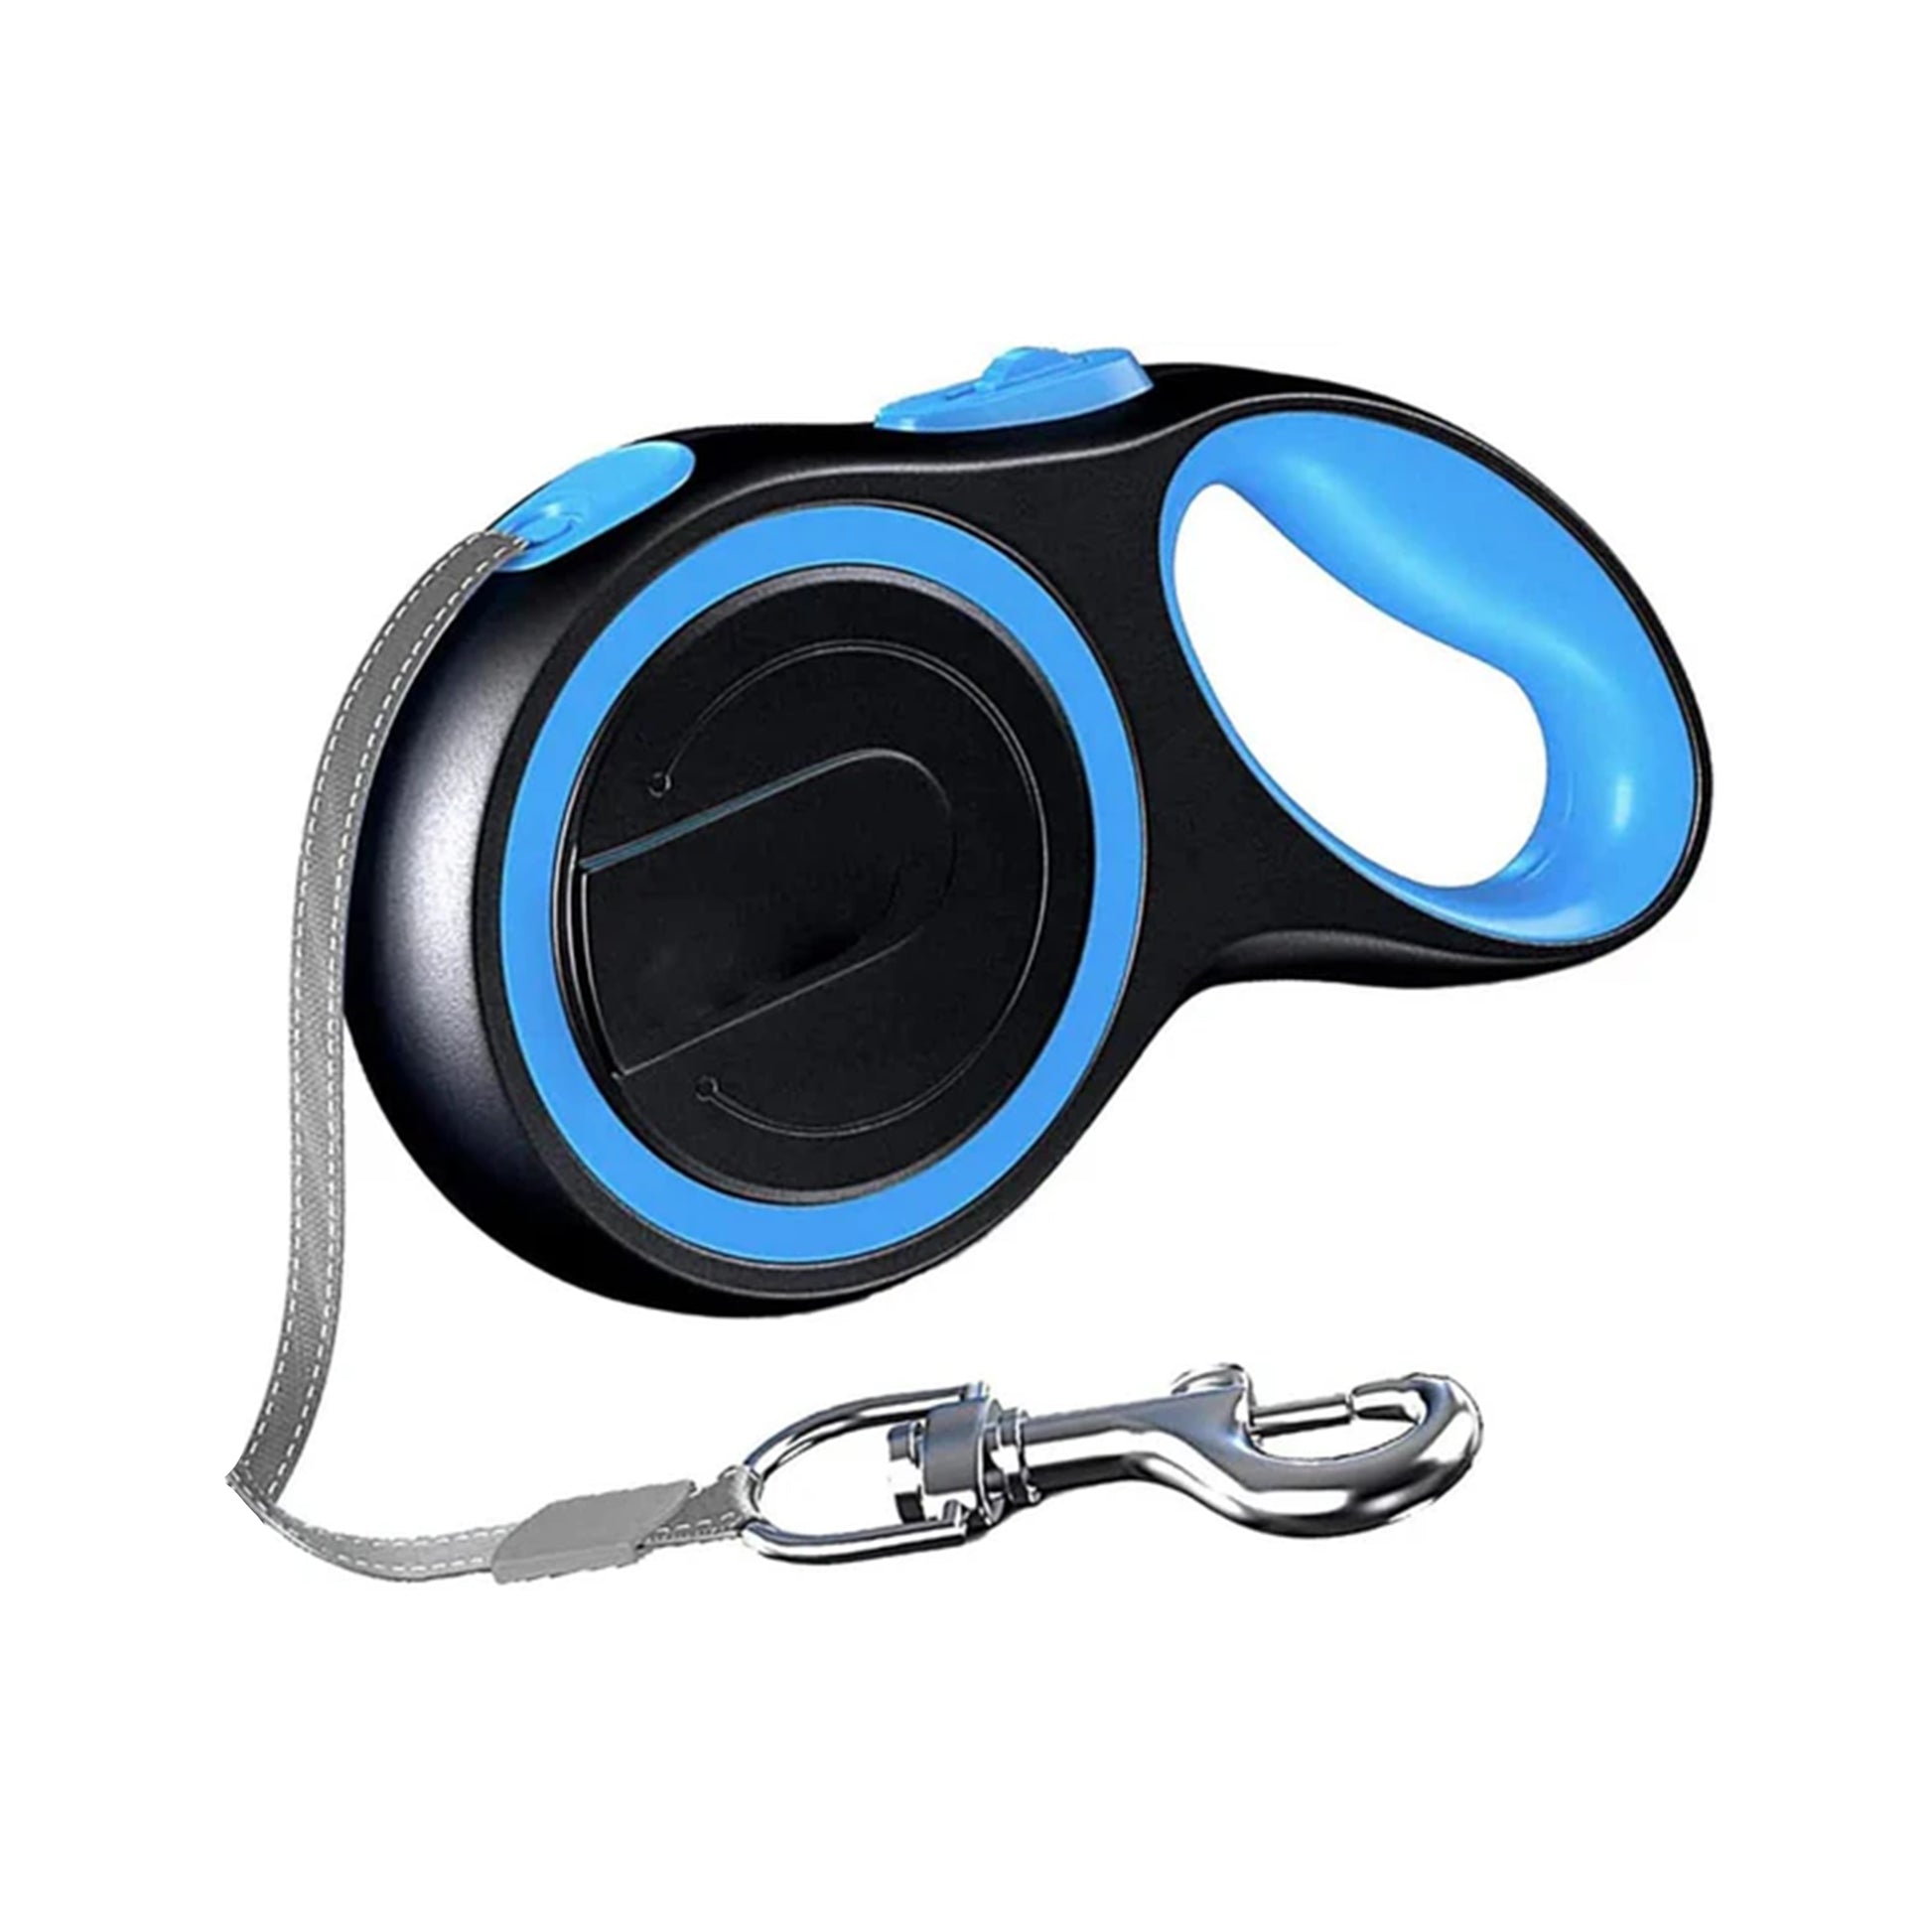 HOCC Retractable Dog Leash 5M with Anti-Slip Handle (Blue), Shop online home decor, furniture, sofa, bed sheet, baby product, pet products, lamp, lights, deco items, decoration, cute home decor, best online shopping, uae, dubai, sharjah, home furniture 